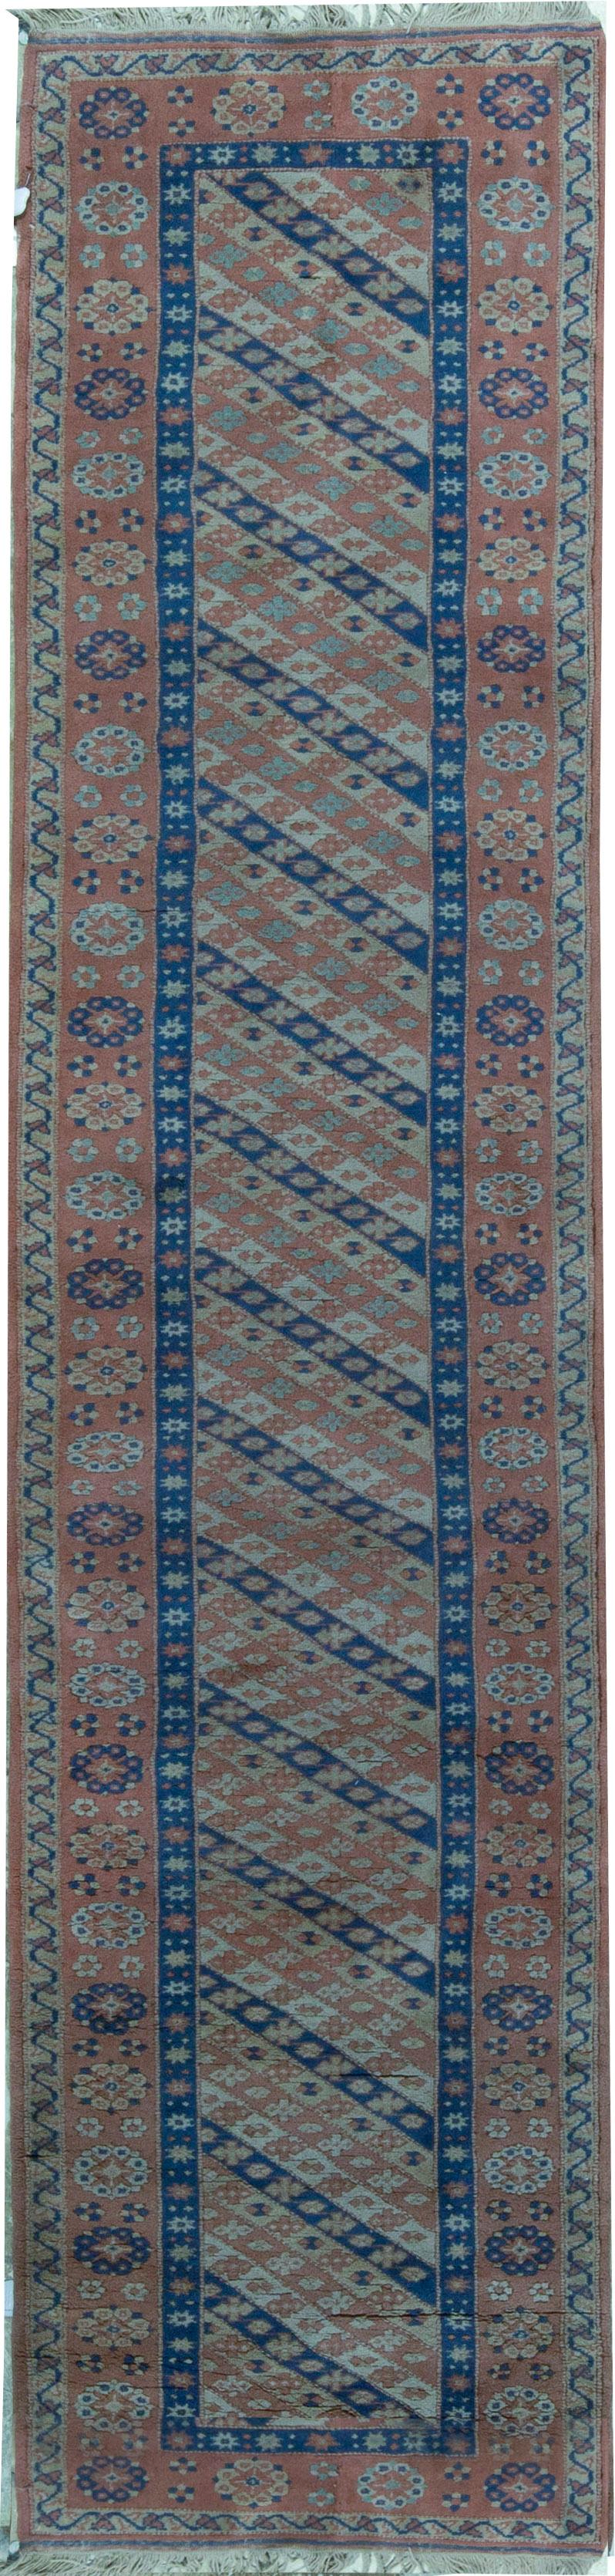 This elegantly handwoven rug is from India and woven from the finest wools to create a soft and luxurious piece that will work well in so many different settings. Size: 2'8